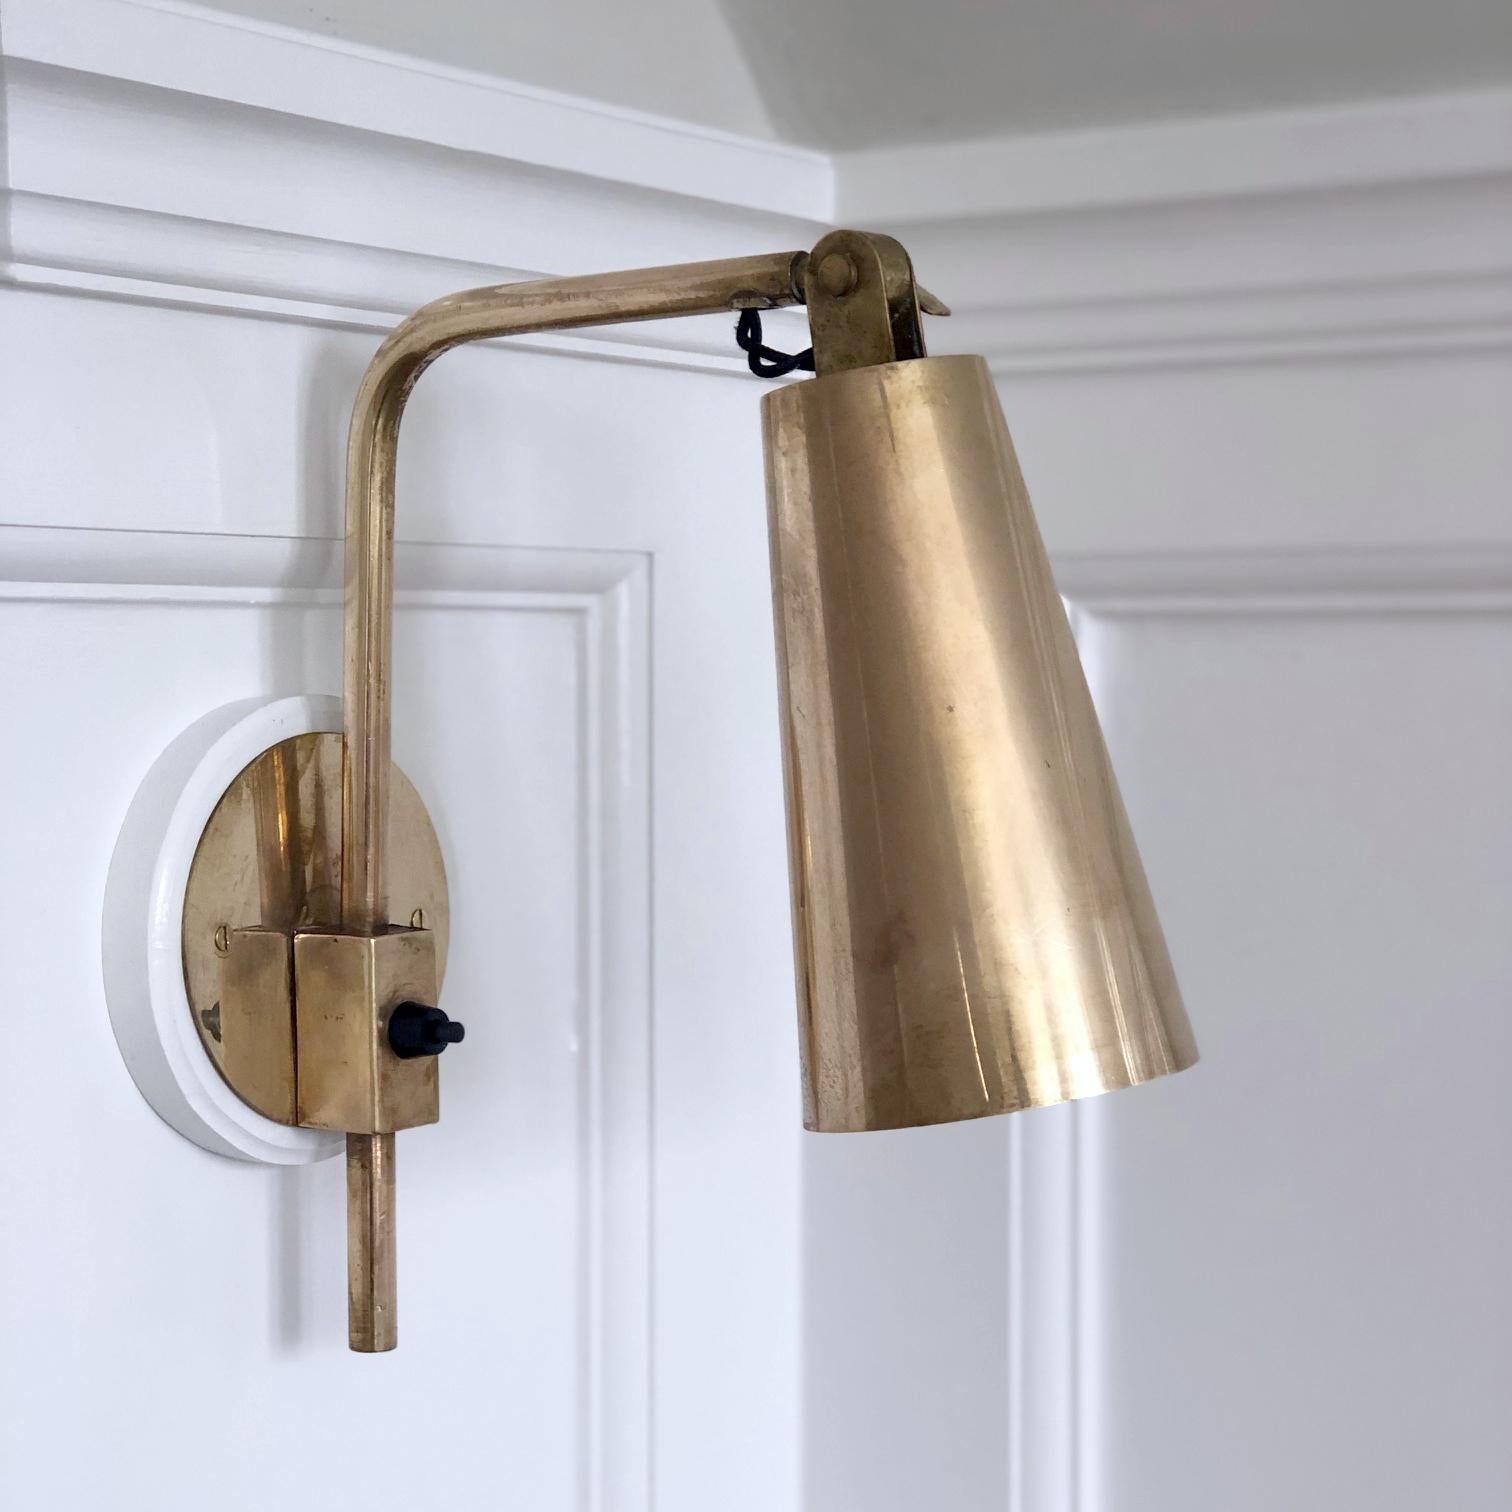 Paavo Tynell & Taito Oy, Mid-Century Modern design

Pair of brass vintage wall lights, designer Paavo Tynell and manufacturer Taito Oy. 

Provenance: Hotel Vaakuna in the 1952. 

The lights have been fully restored and rewired, ready for use.